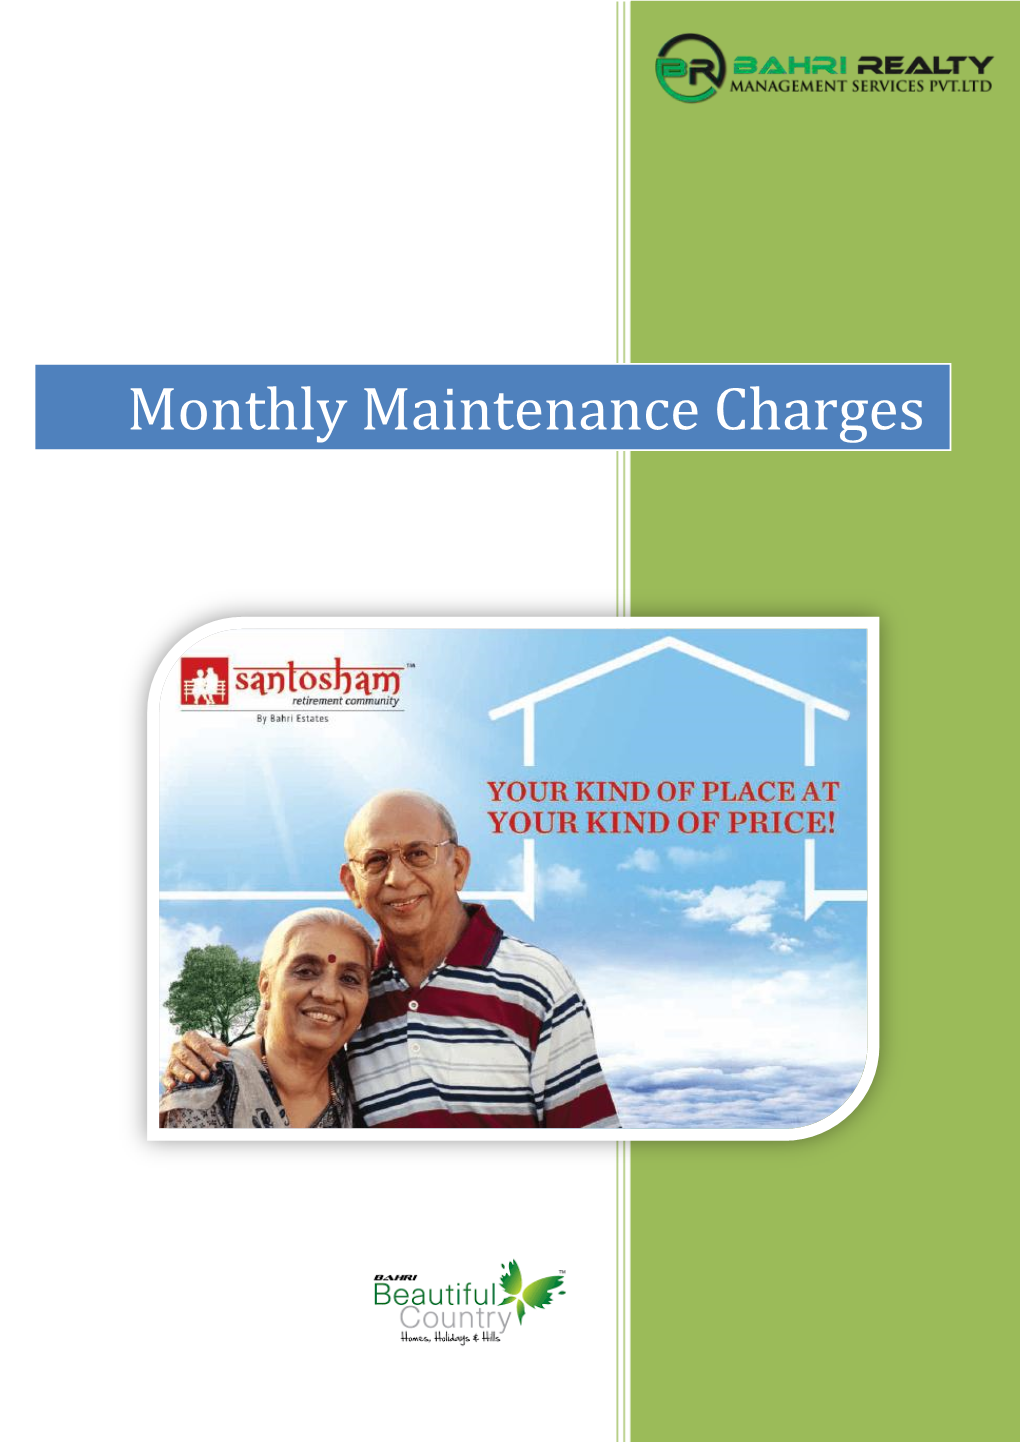 Monthly Maintenance Charges